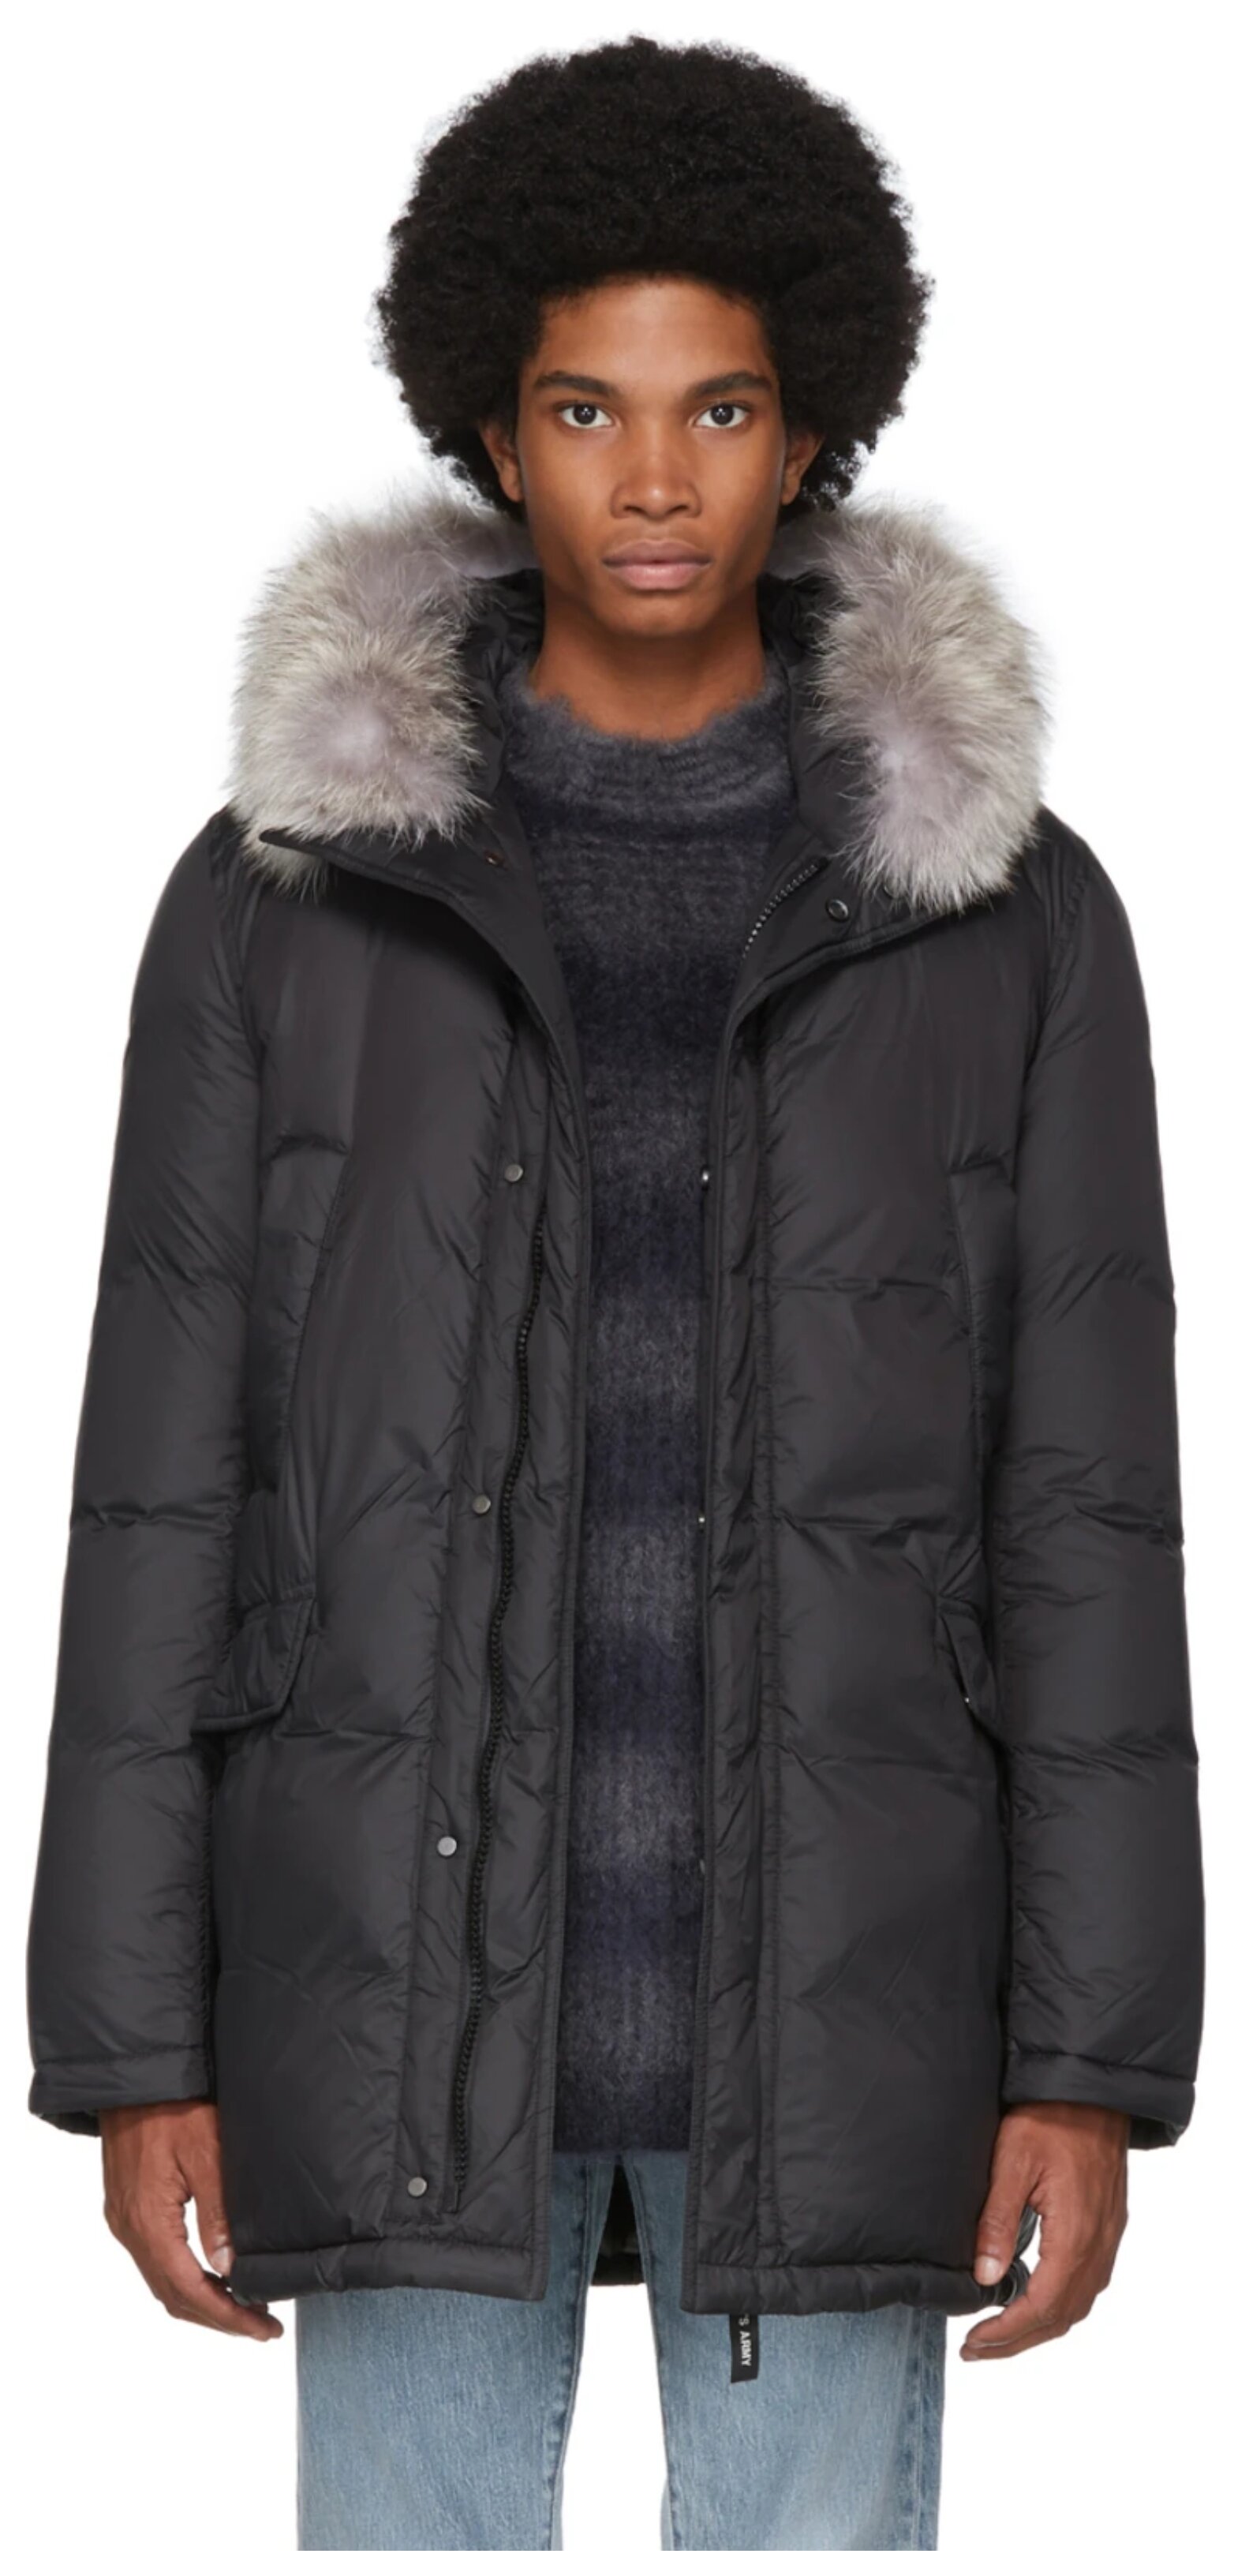 Yves Salomon Winter Jackets On Sale For Up To 70% Off! — Clothes Under Cost